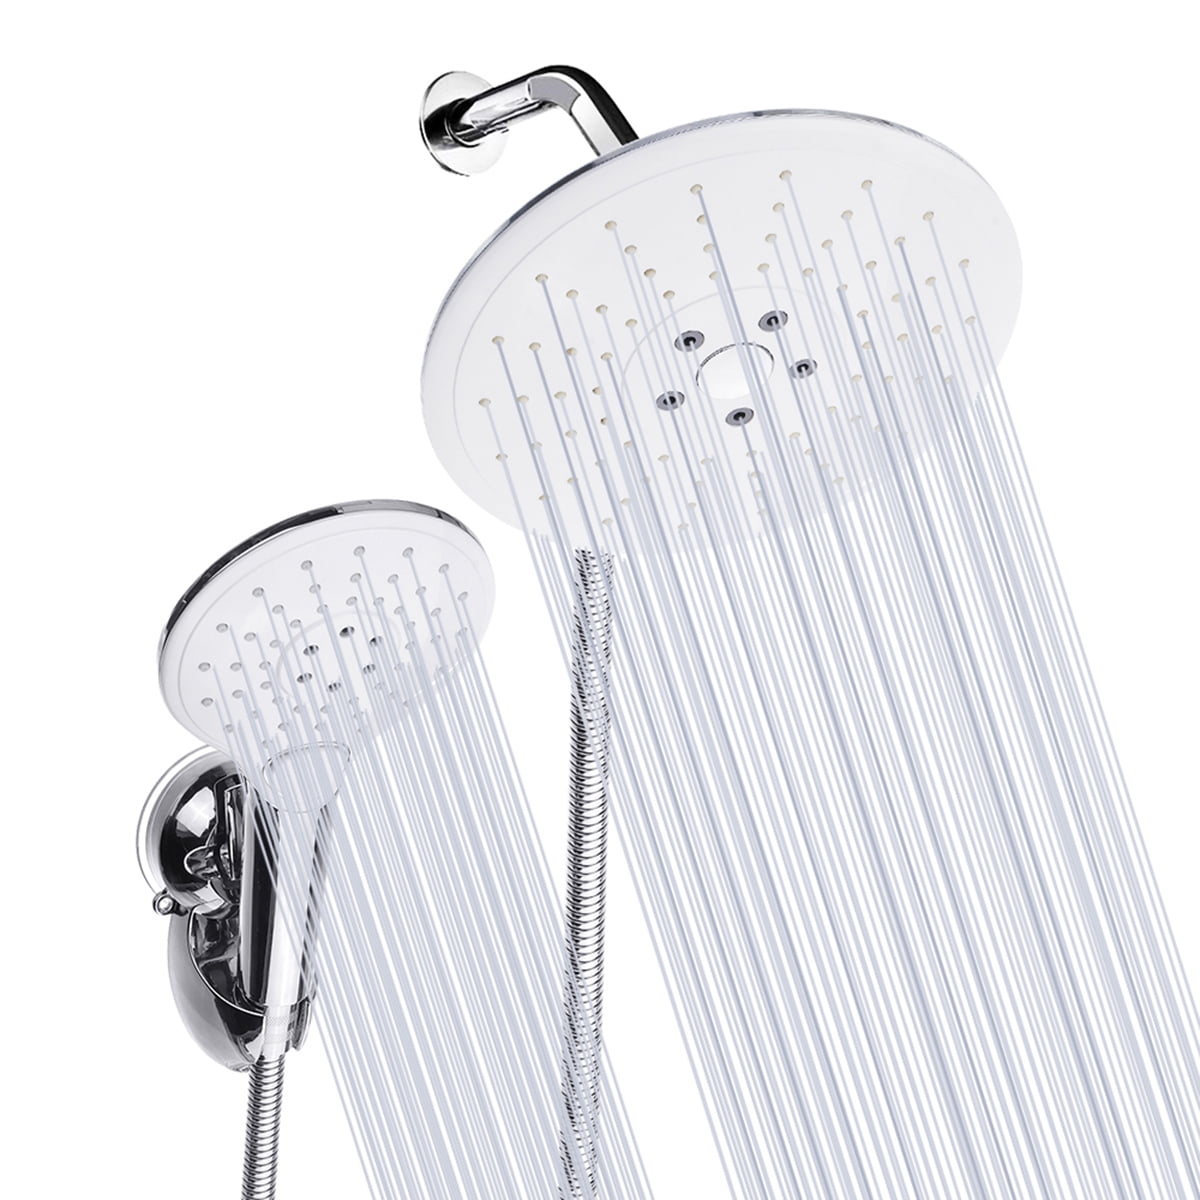 DreamSpa Luxury 9" Rainfall Shower Head Handheld Combo With Flow Control Button 